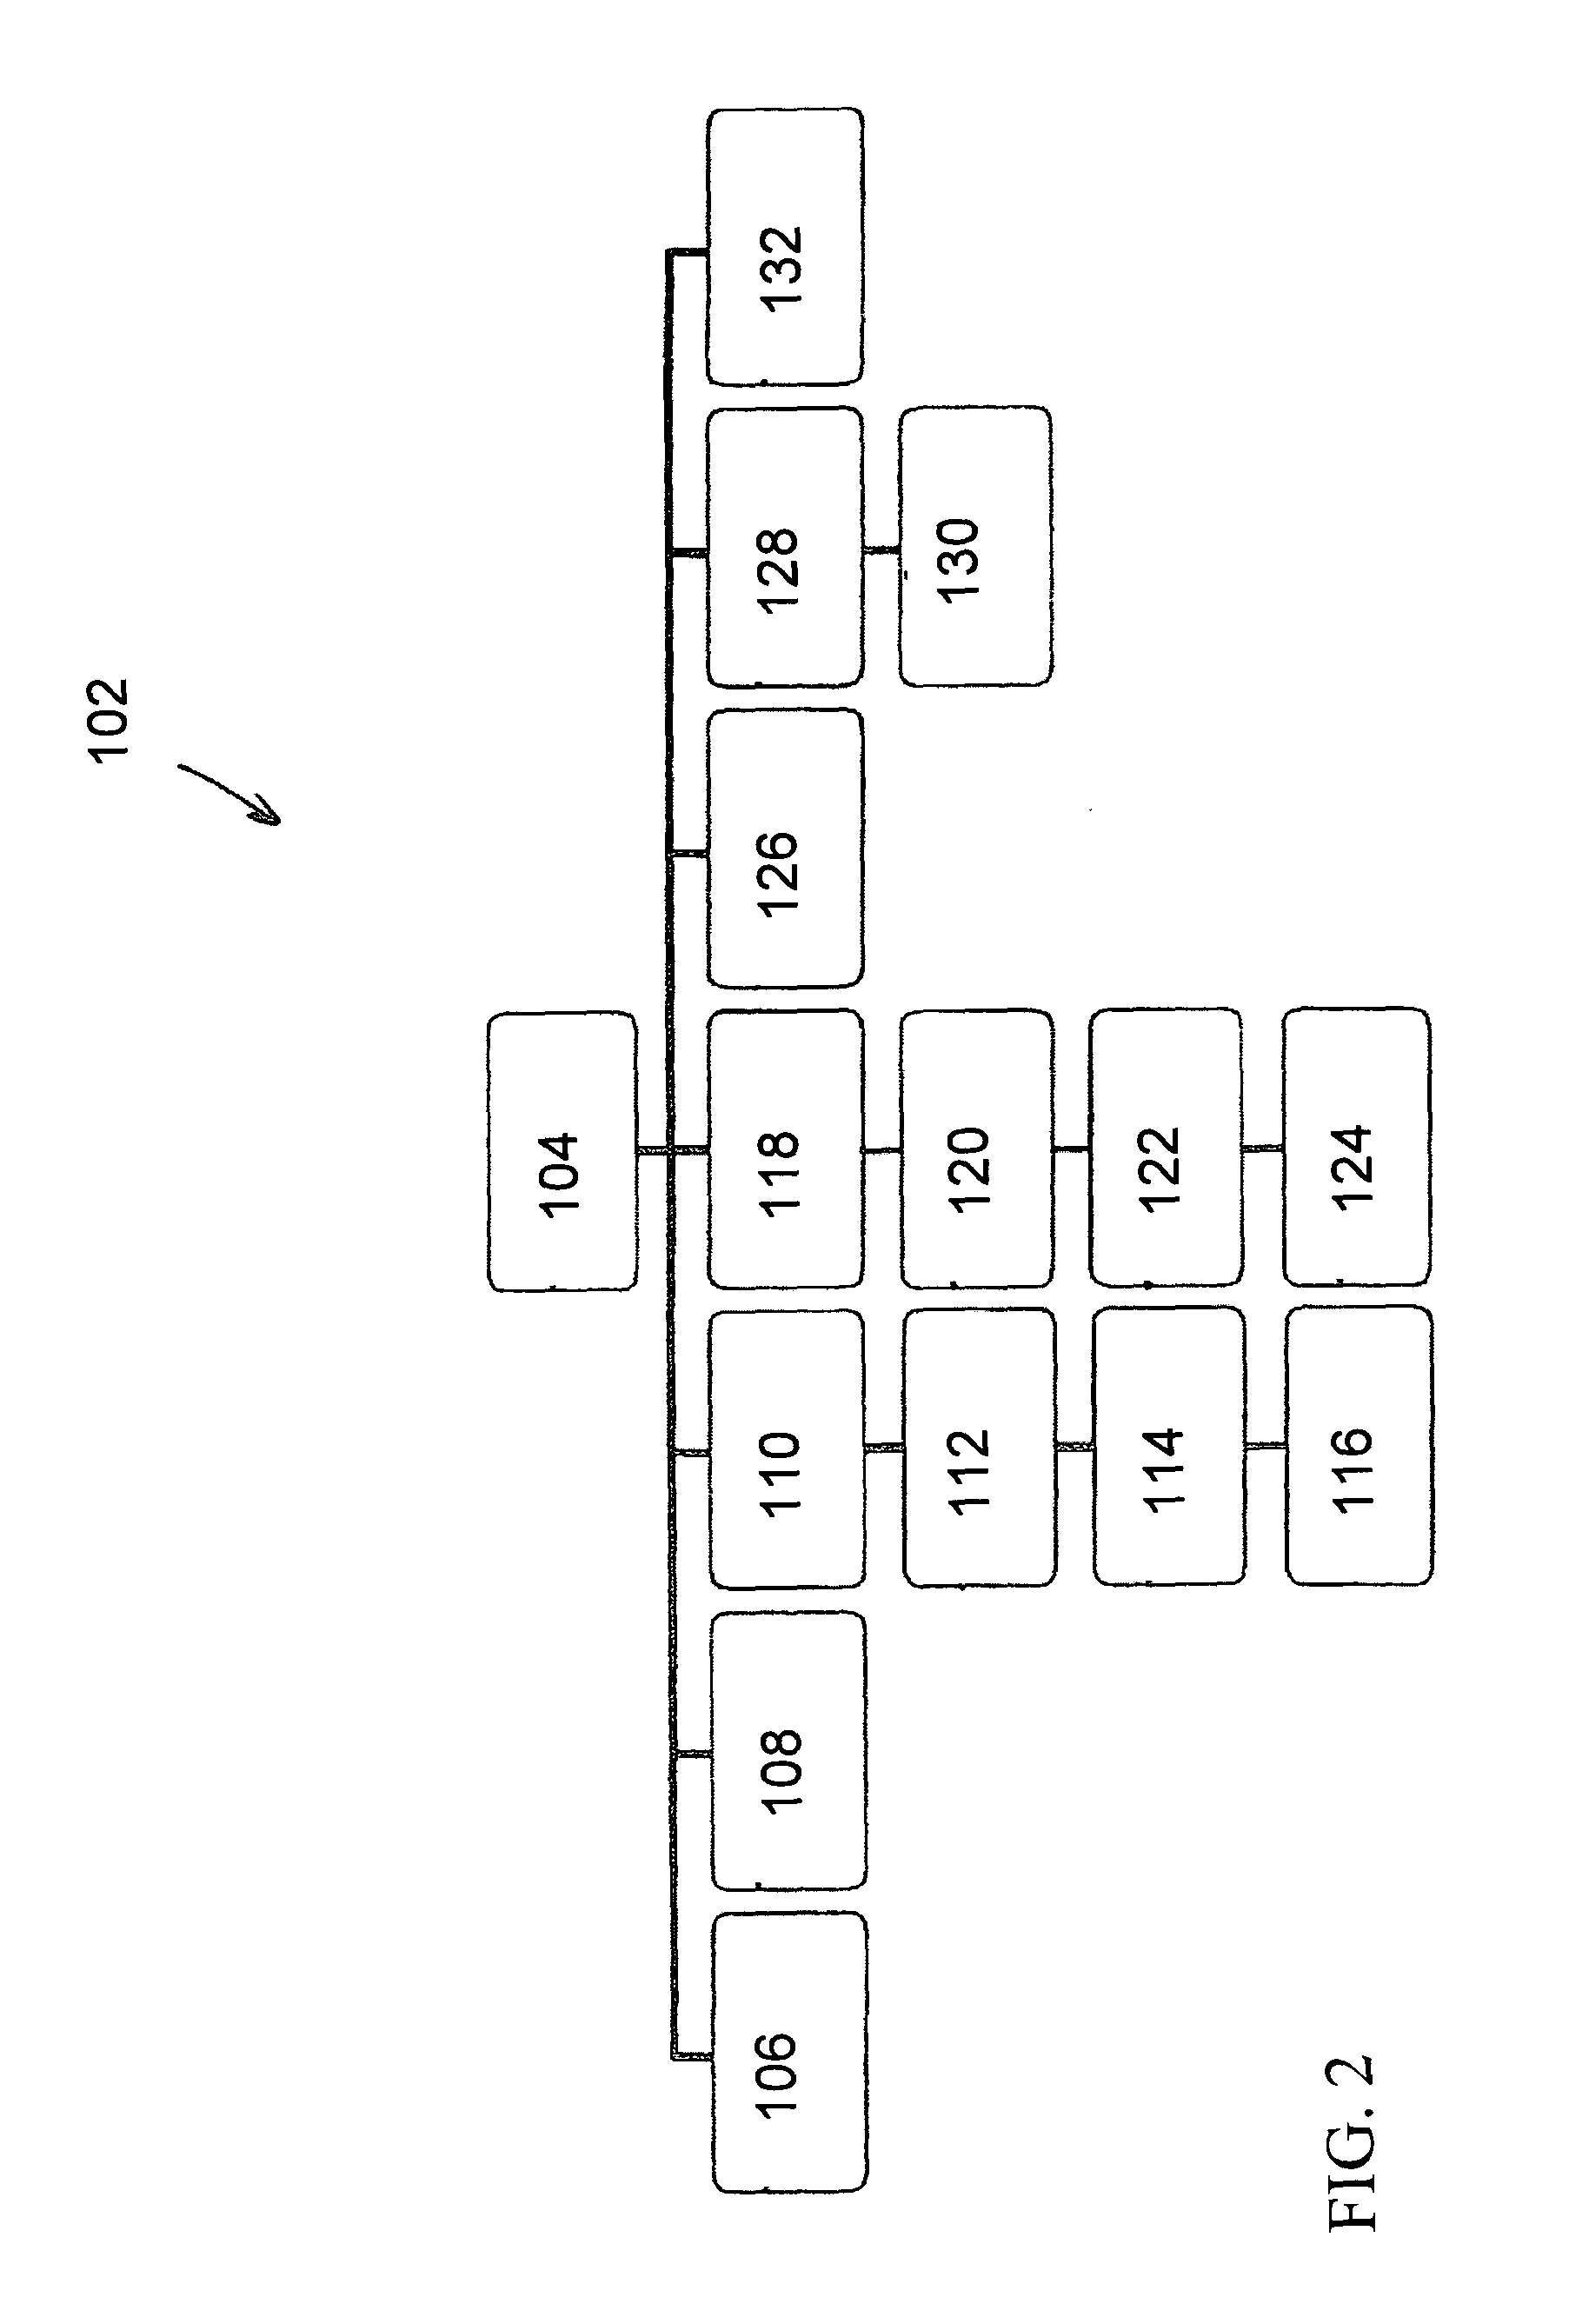 System for registration and control of the fuel consumption of a vehicle